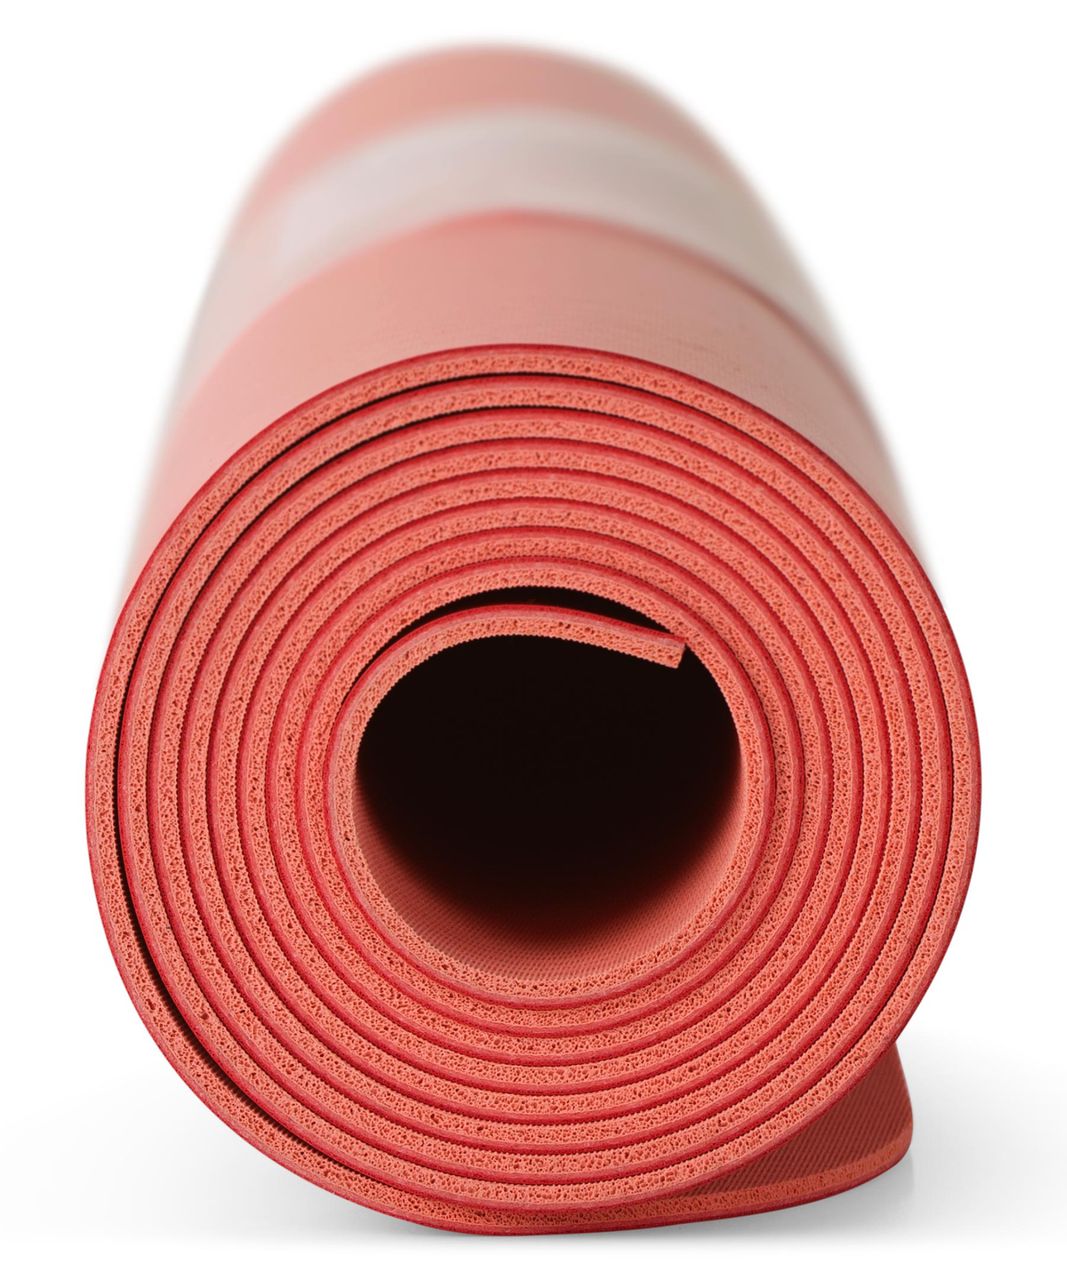 Lululemon The Mat 3mm - atomic red							 																													The Mat 3mm - Atomic Red